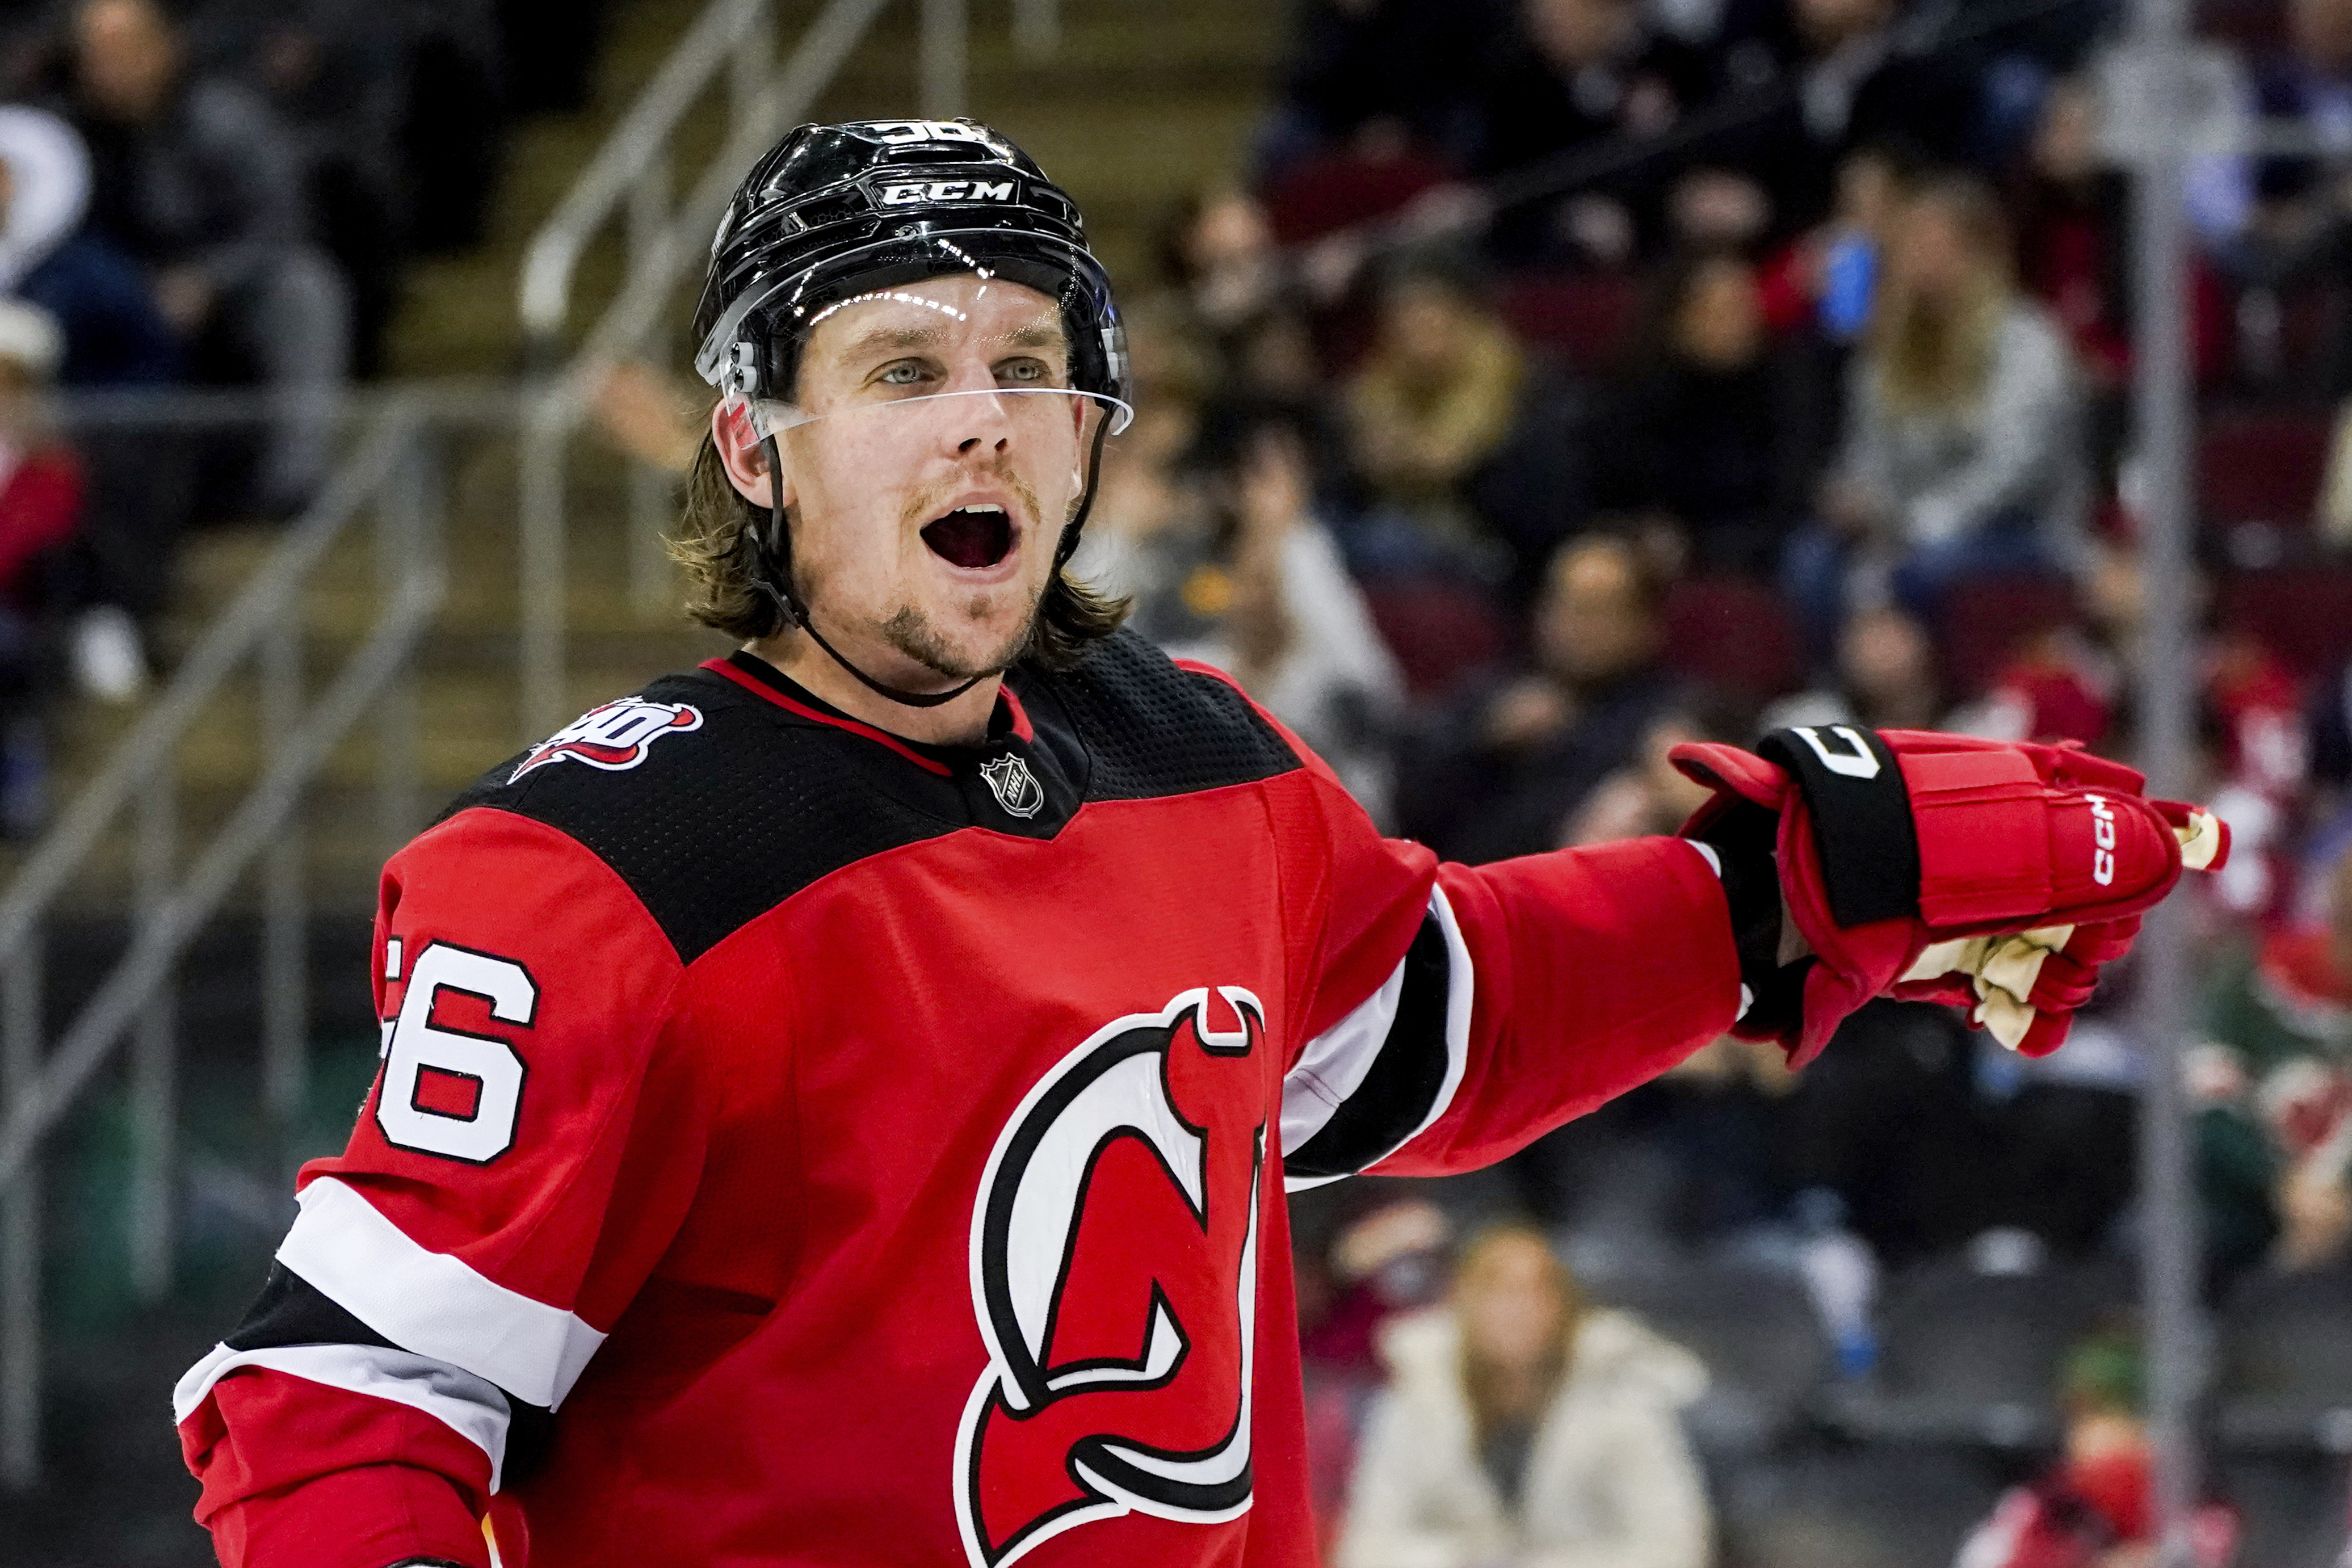 Inside The Rink - The Devils have inked Erik Haula to a three-year  extension! #NHL #NJDevils